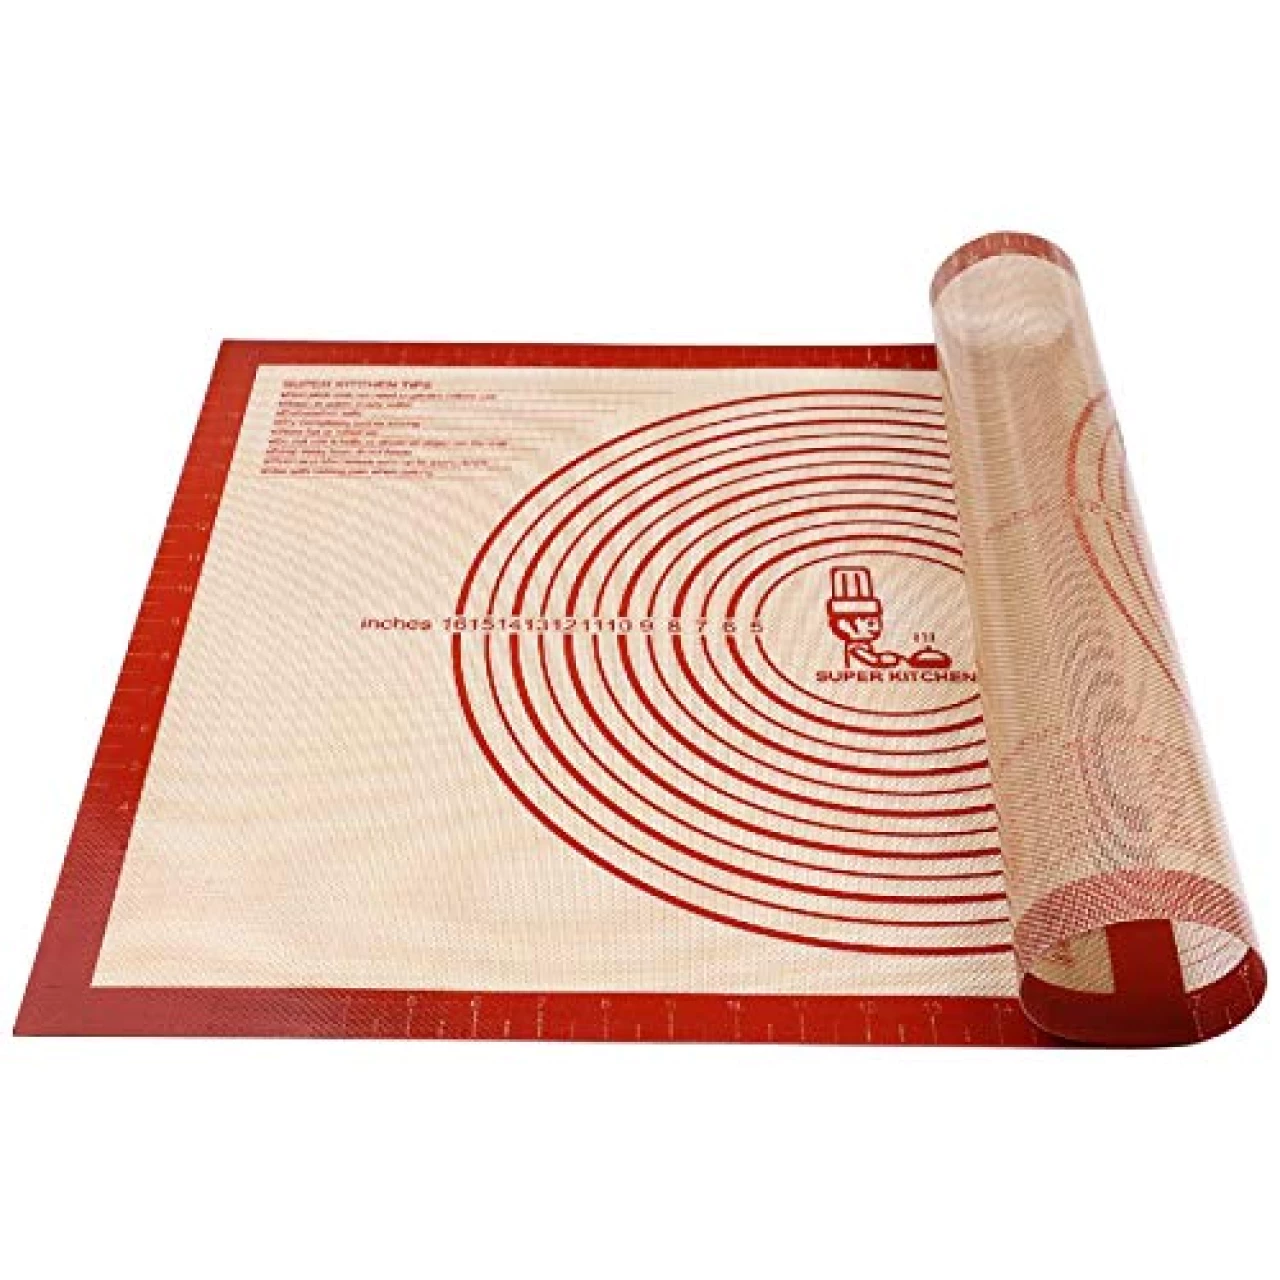 Non-slip Pastry Mat Extra Large with Measurements 28&rsquo;&lsquo;By 20&rsquo;&rsquo; for Silicone Baking/ Counter Mat, Dough Rolling Mat,Oven Liner,Fondant/Pie Crust Mat By Folksy Super Kitchen Red